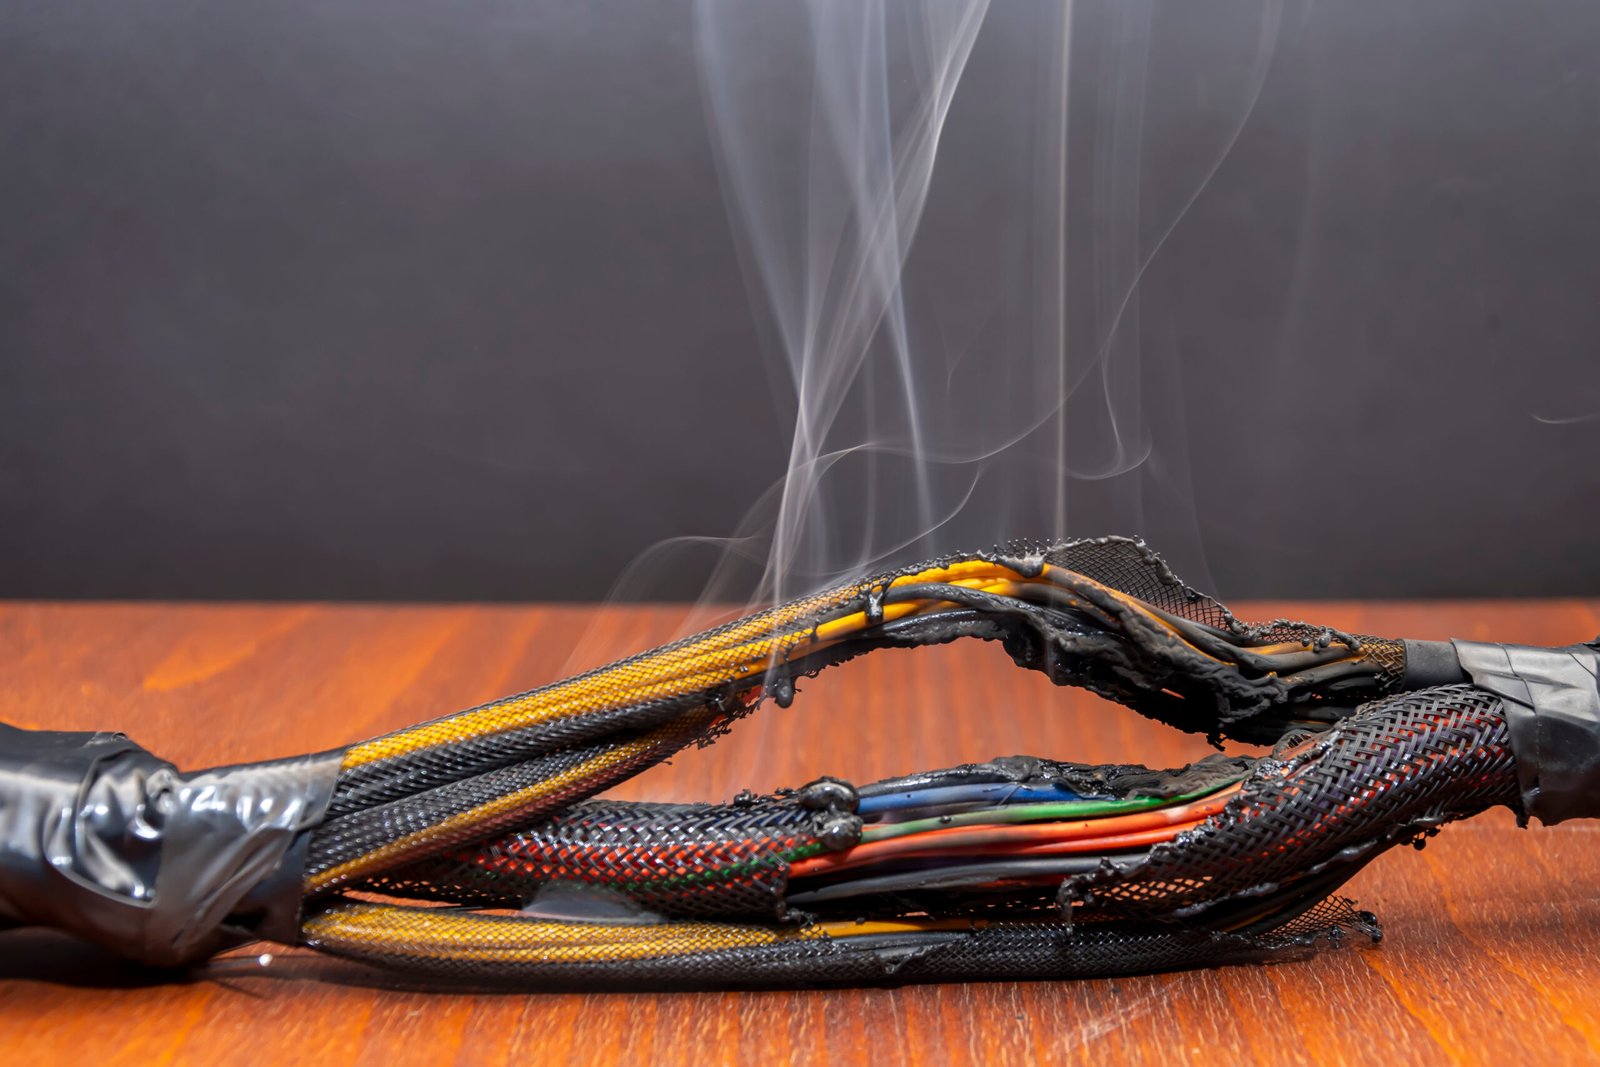 Burning smell may require electrical service